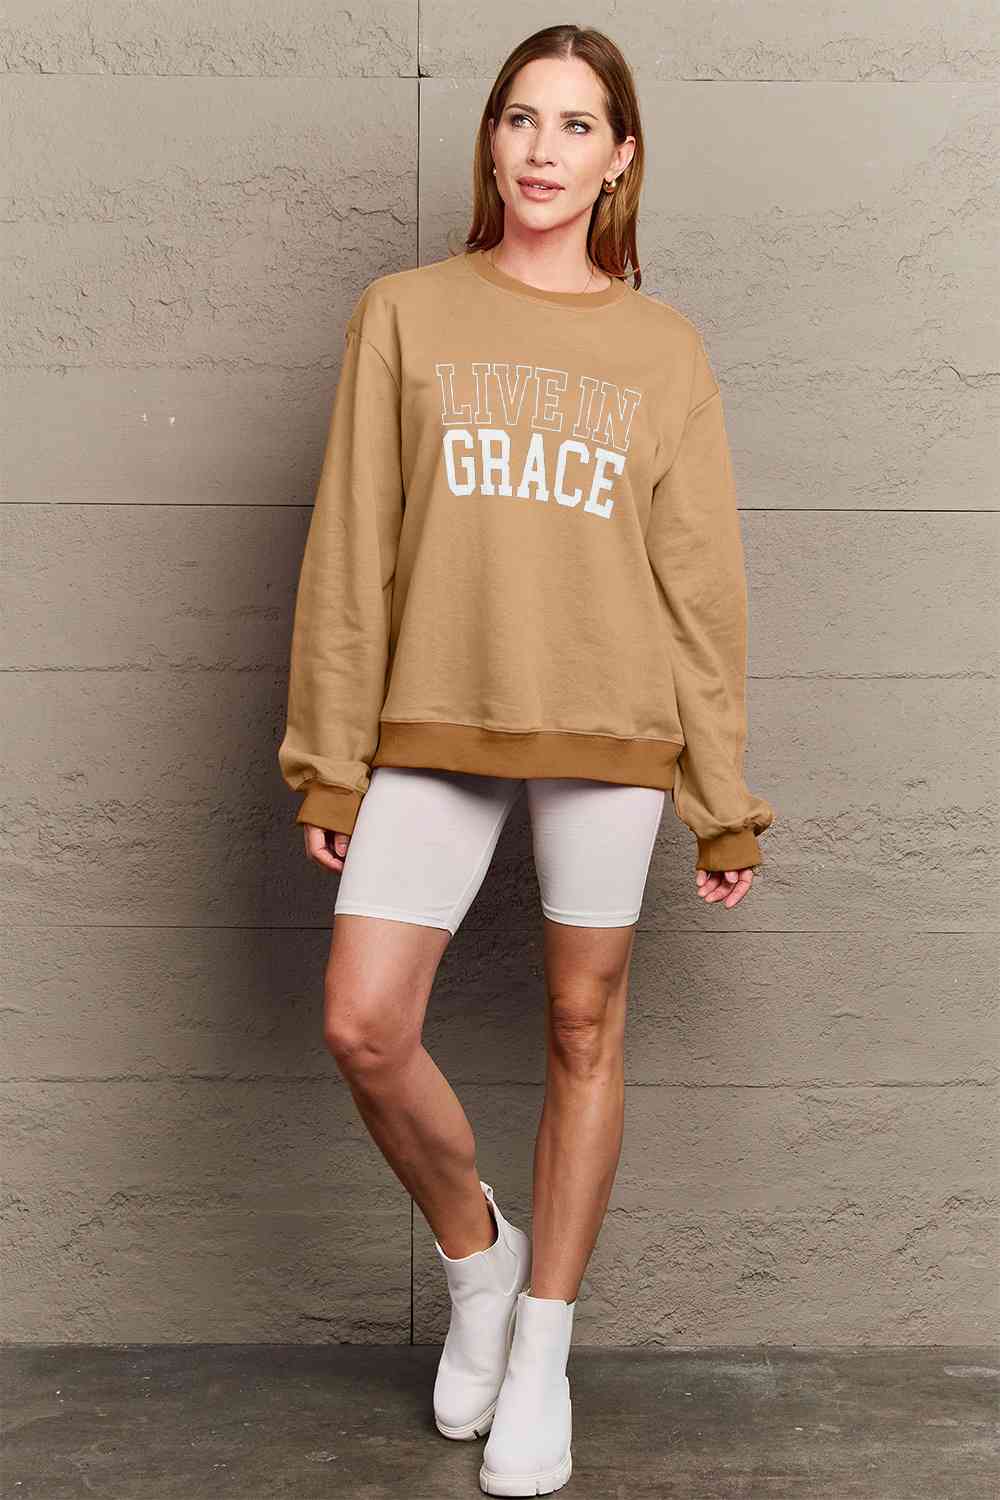 Full Size LIVE IN GRACE Graphic Sweatshirt